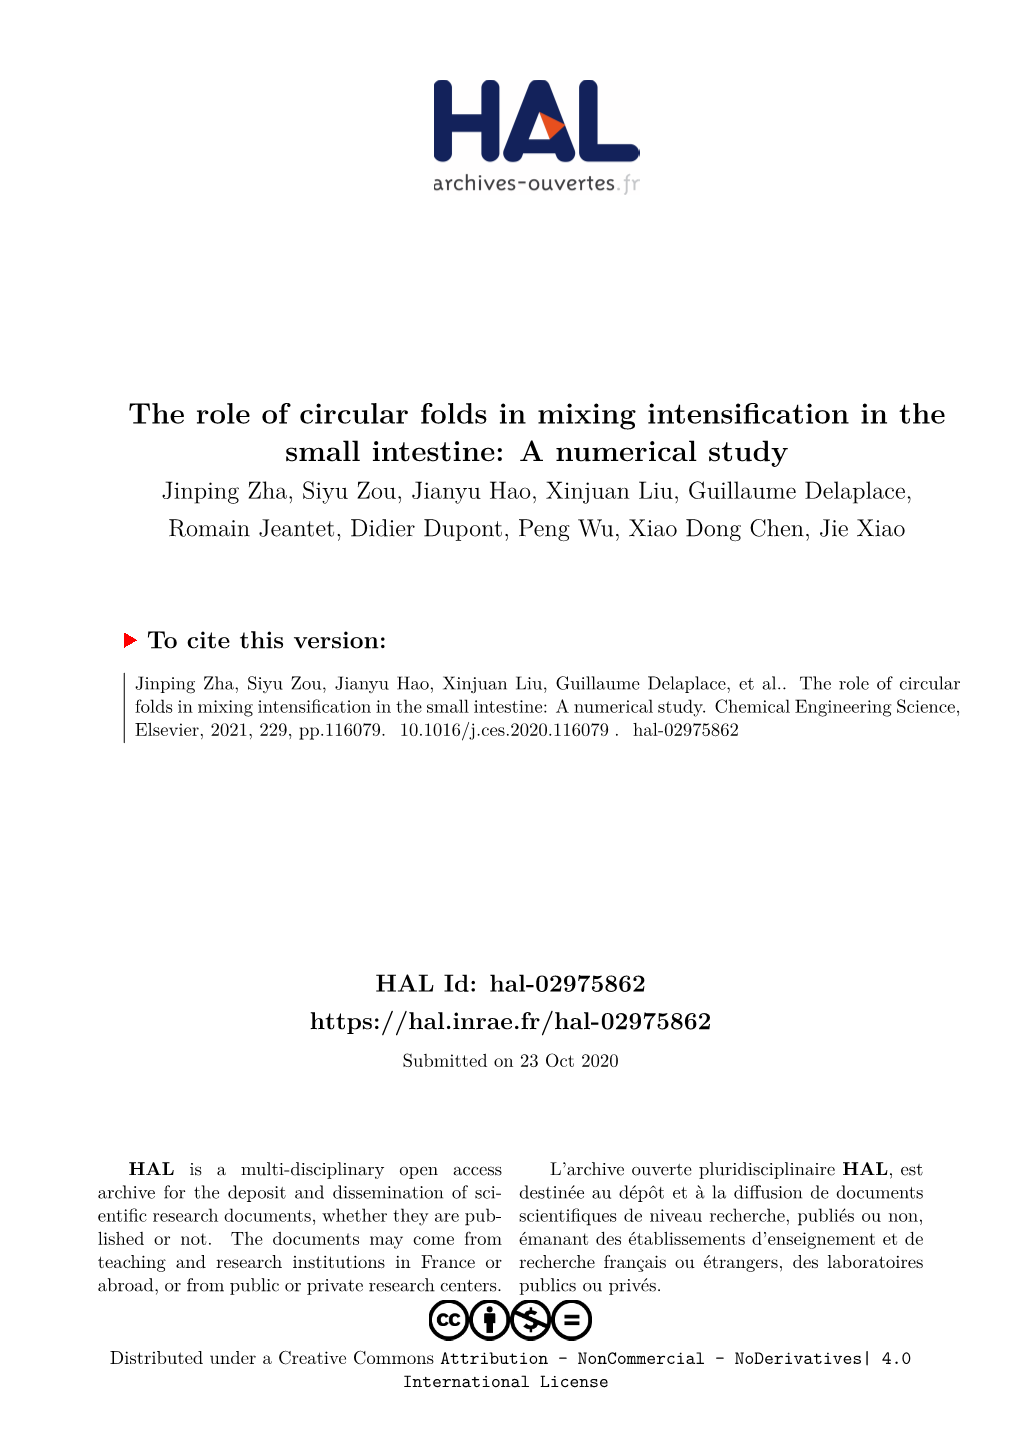 The Role of Circular Folds in Mixing Intensification in The